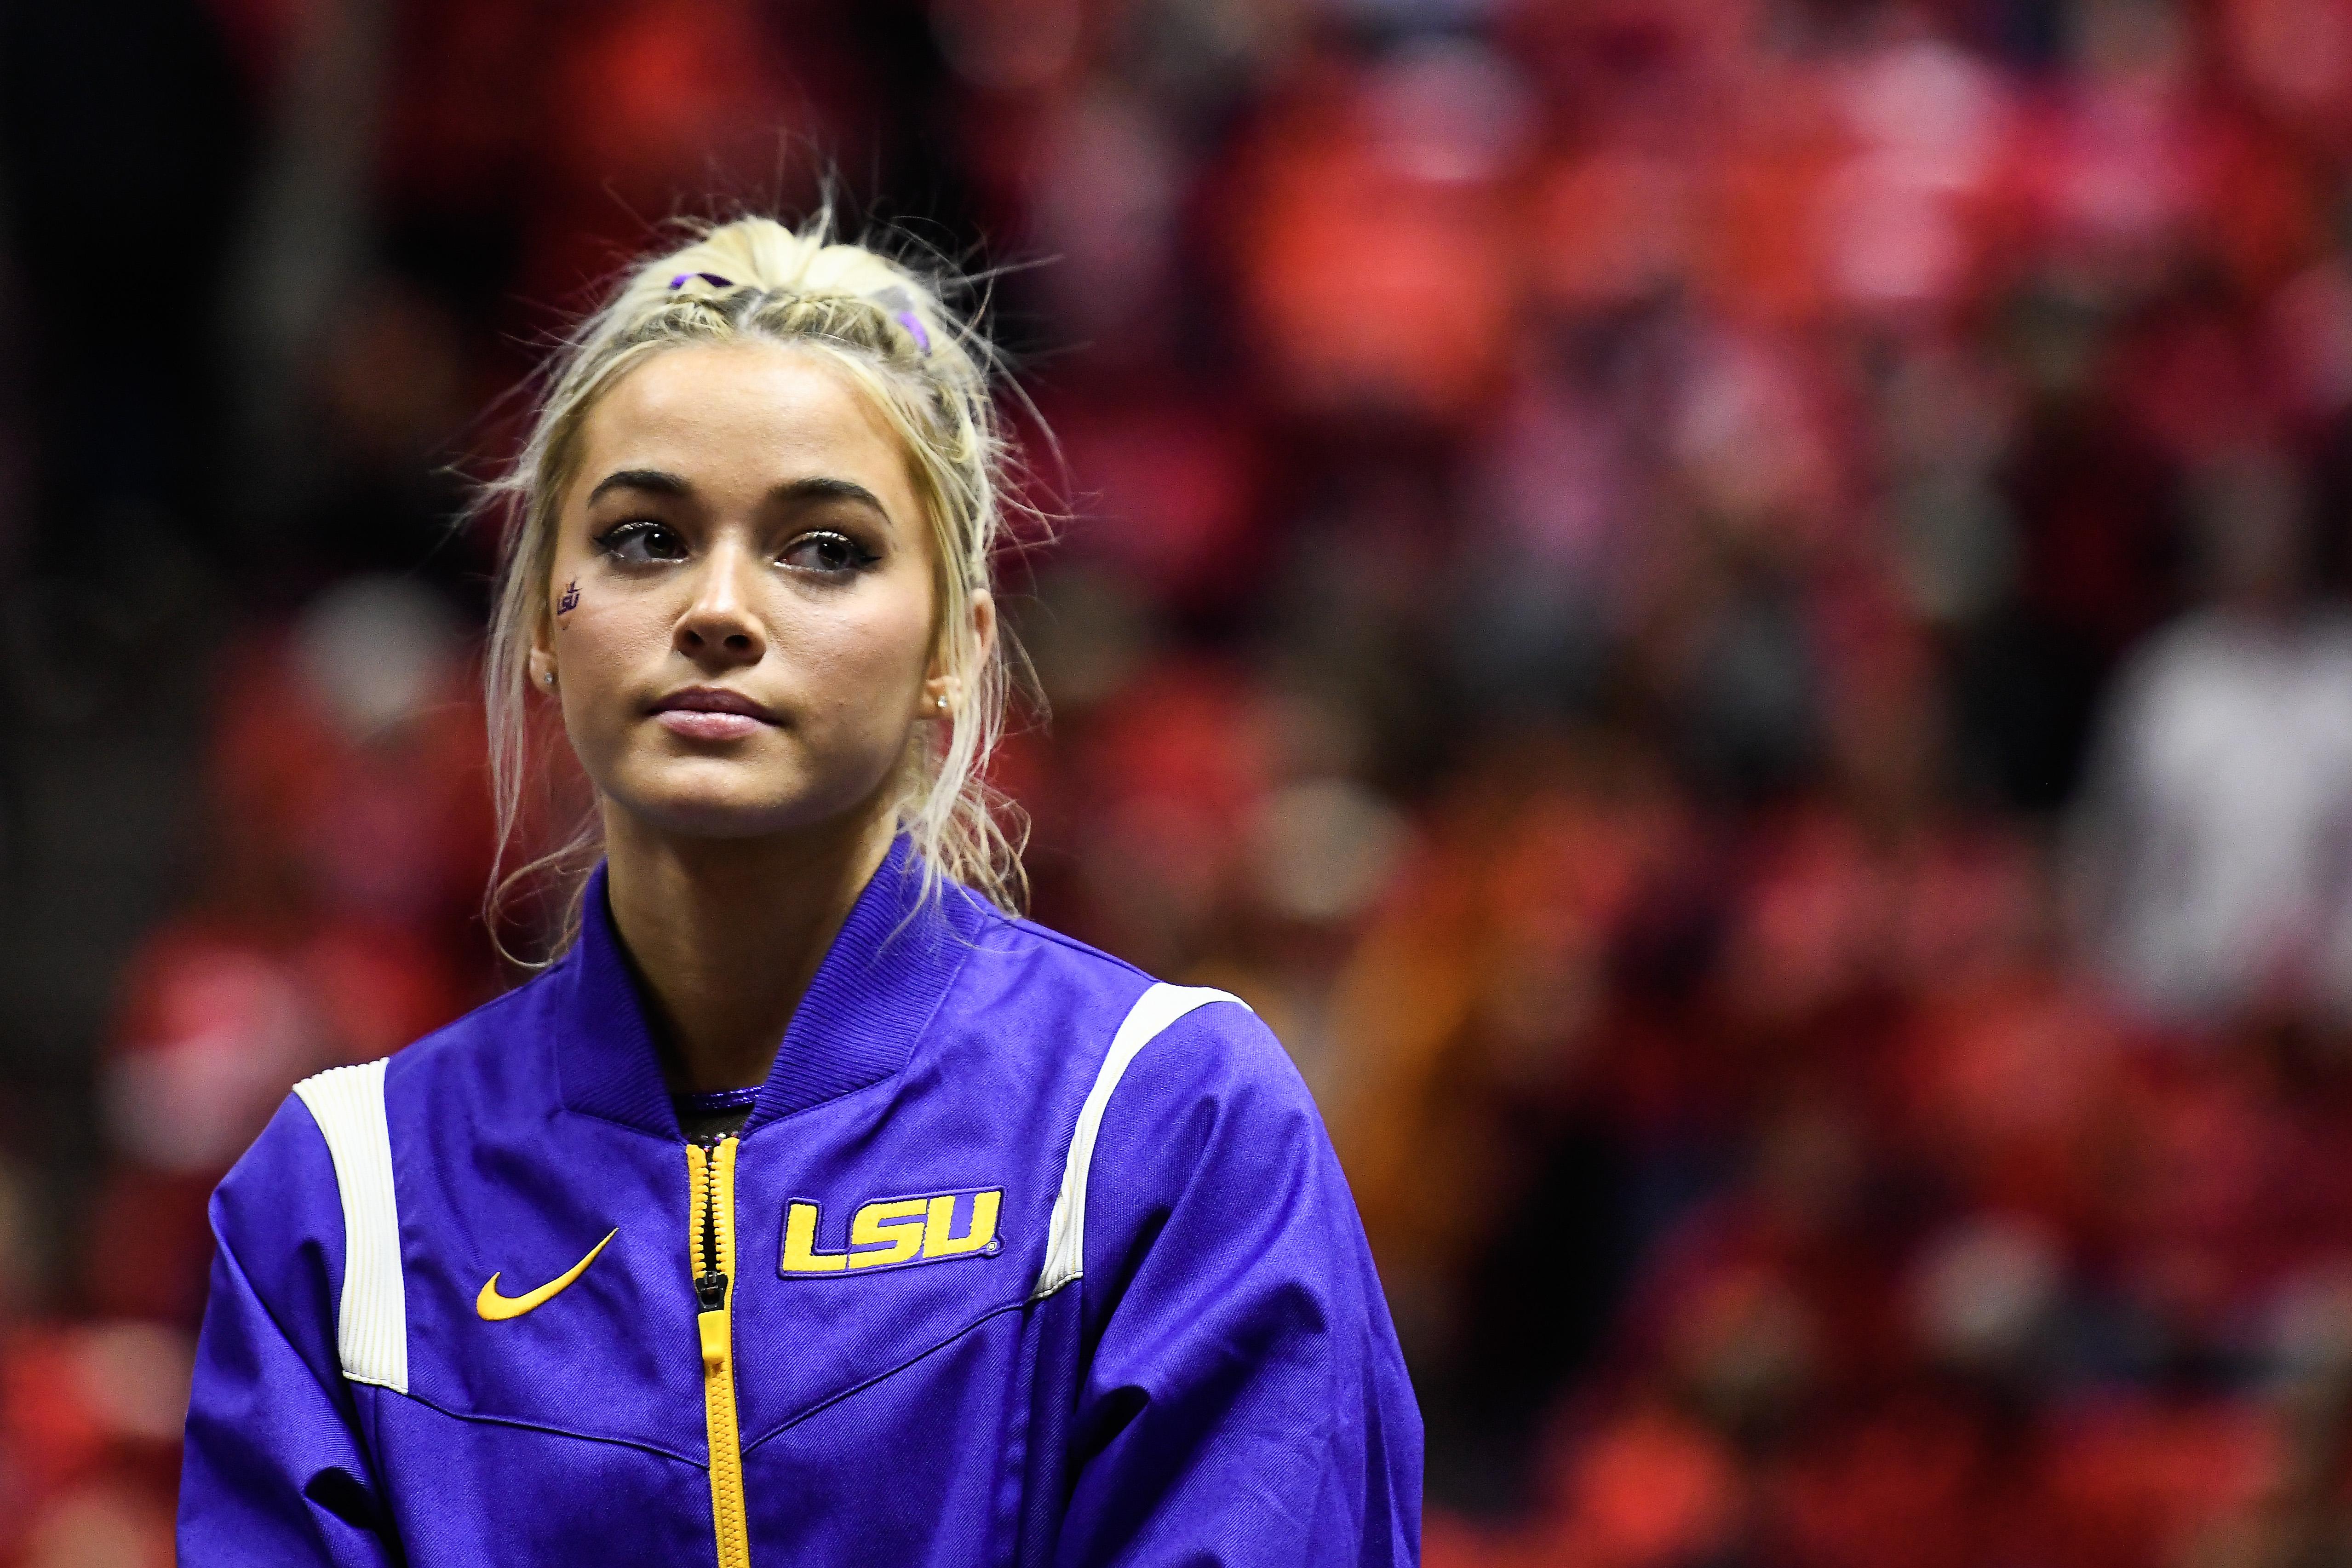 Olivia Dunne, LSU gymnastics and TikTok star, and her disconcerting teen boy fans, explained.